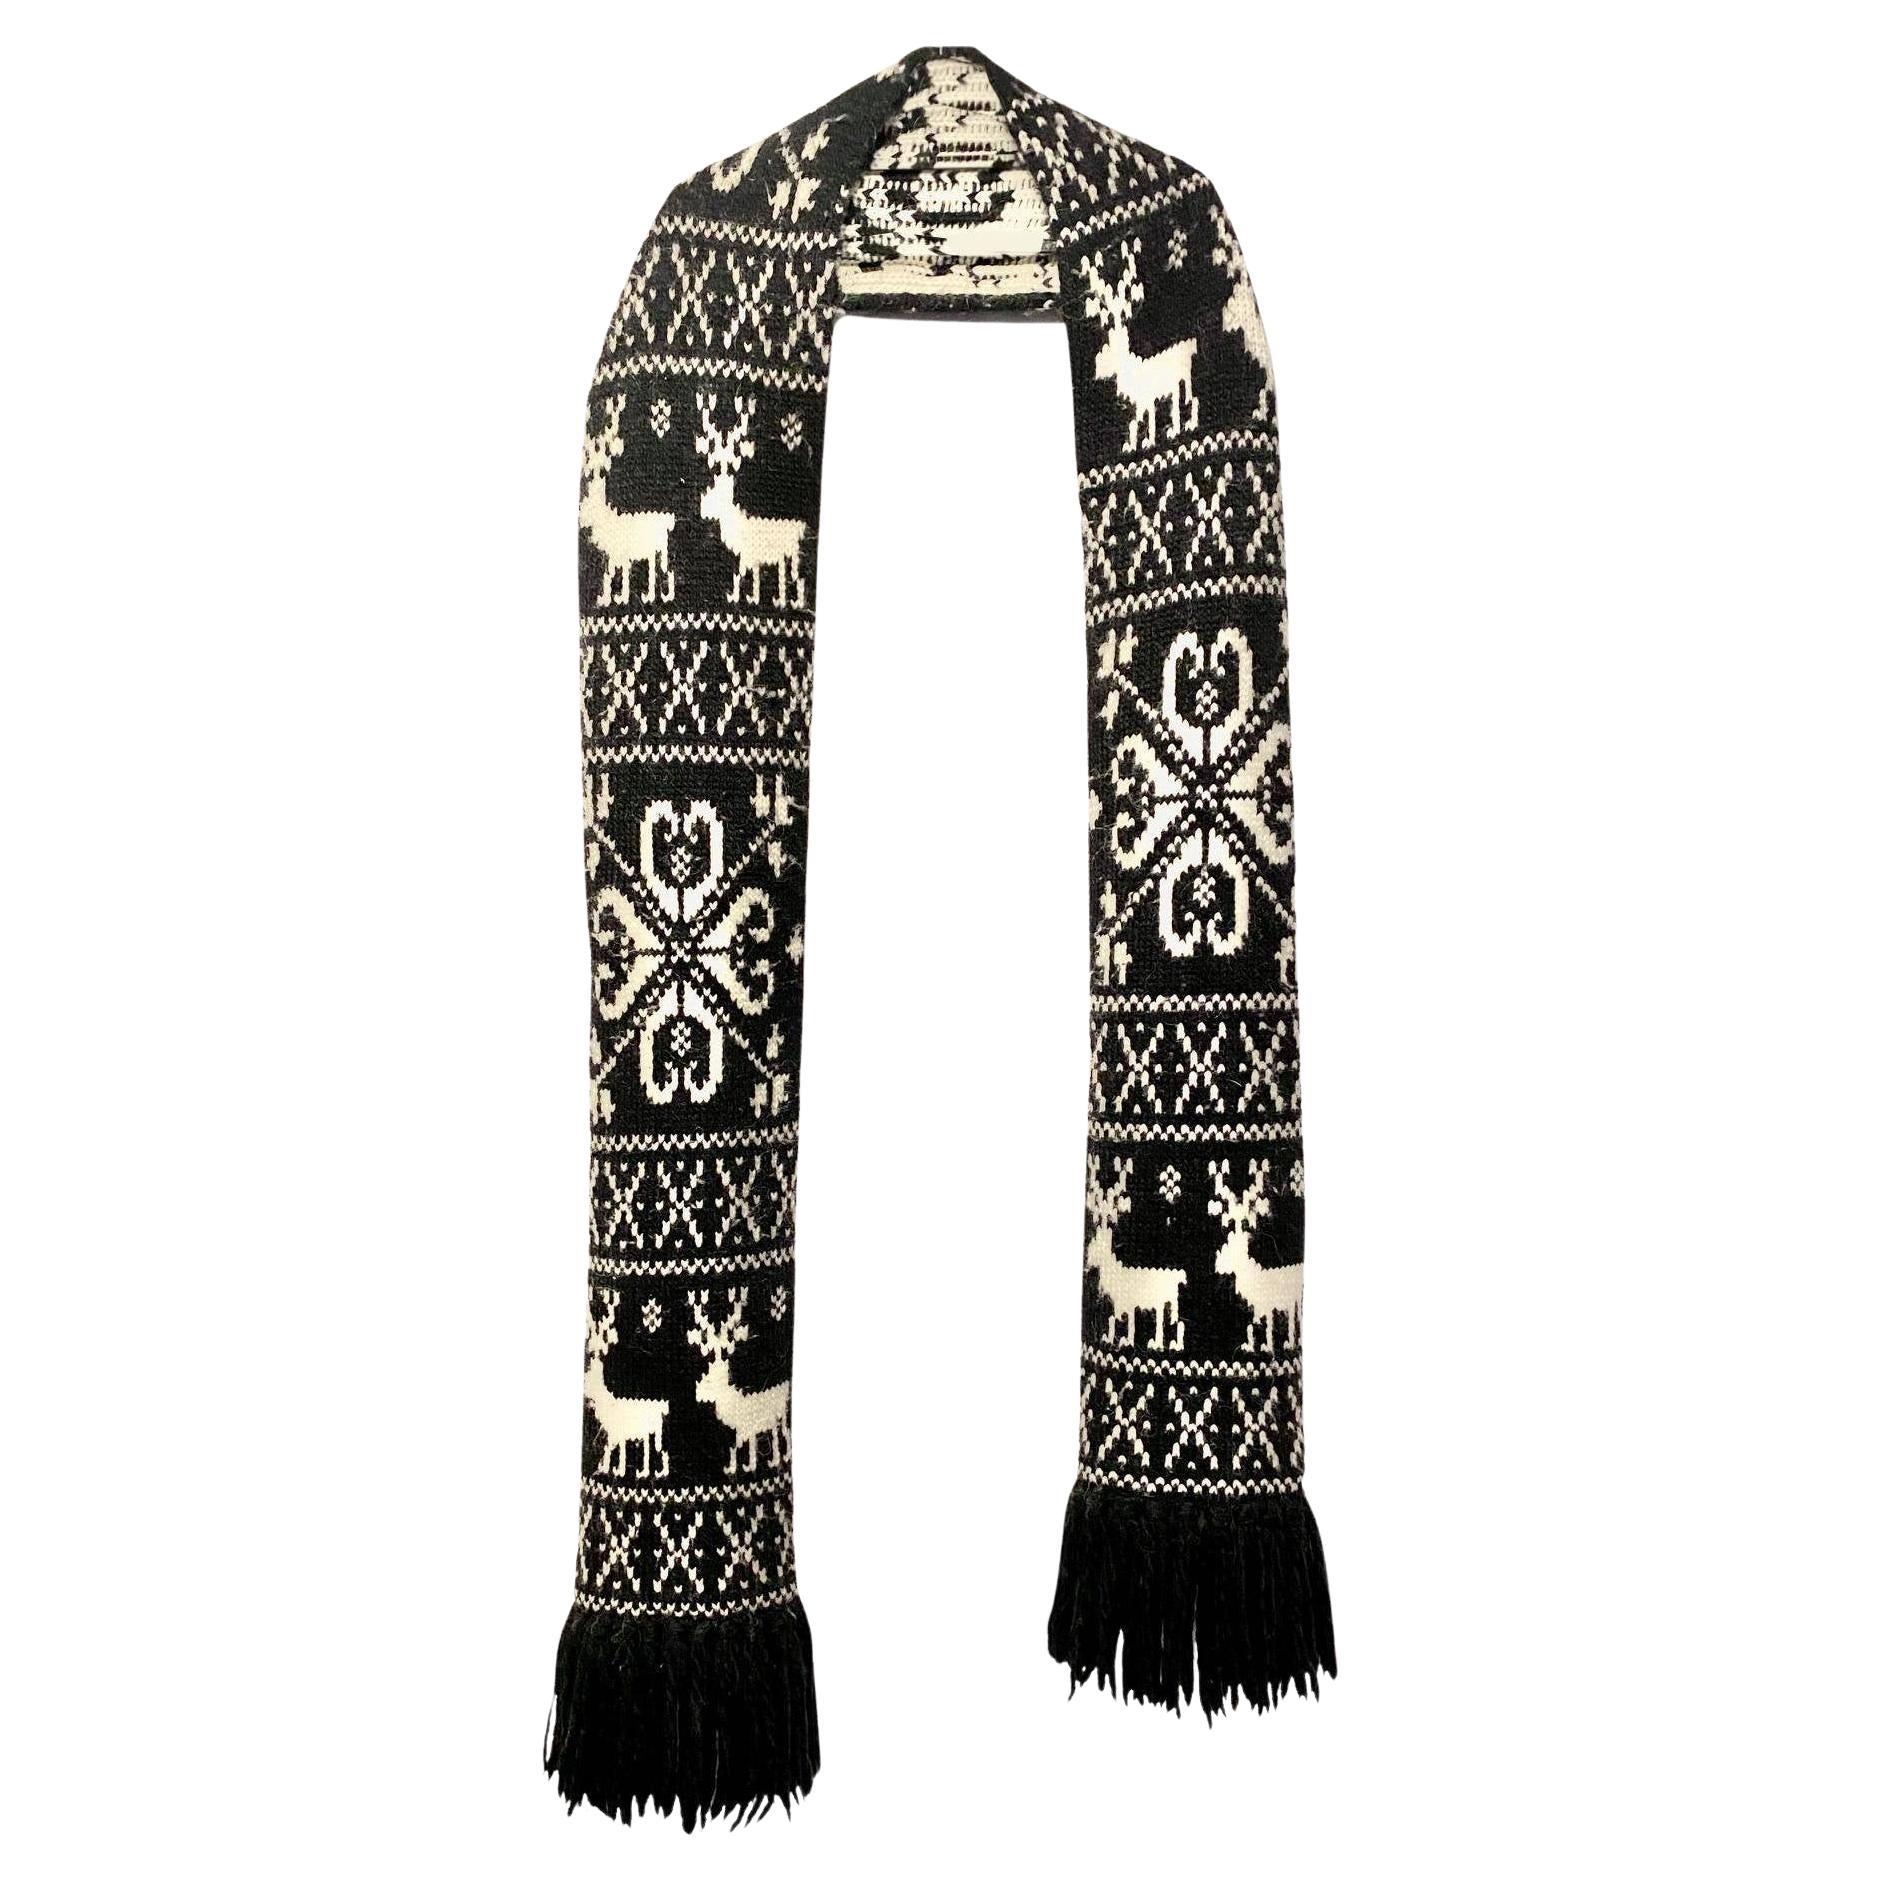 This rare, 270cm-long scarf from Dolce and Gabbana's 90s collection is a luxurious blend of 45% wool, 30% acrylic and 25% alpaca, making it irresistibly soft and stylish. Woven in Italy to the highest standards, this winter accessory will add an